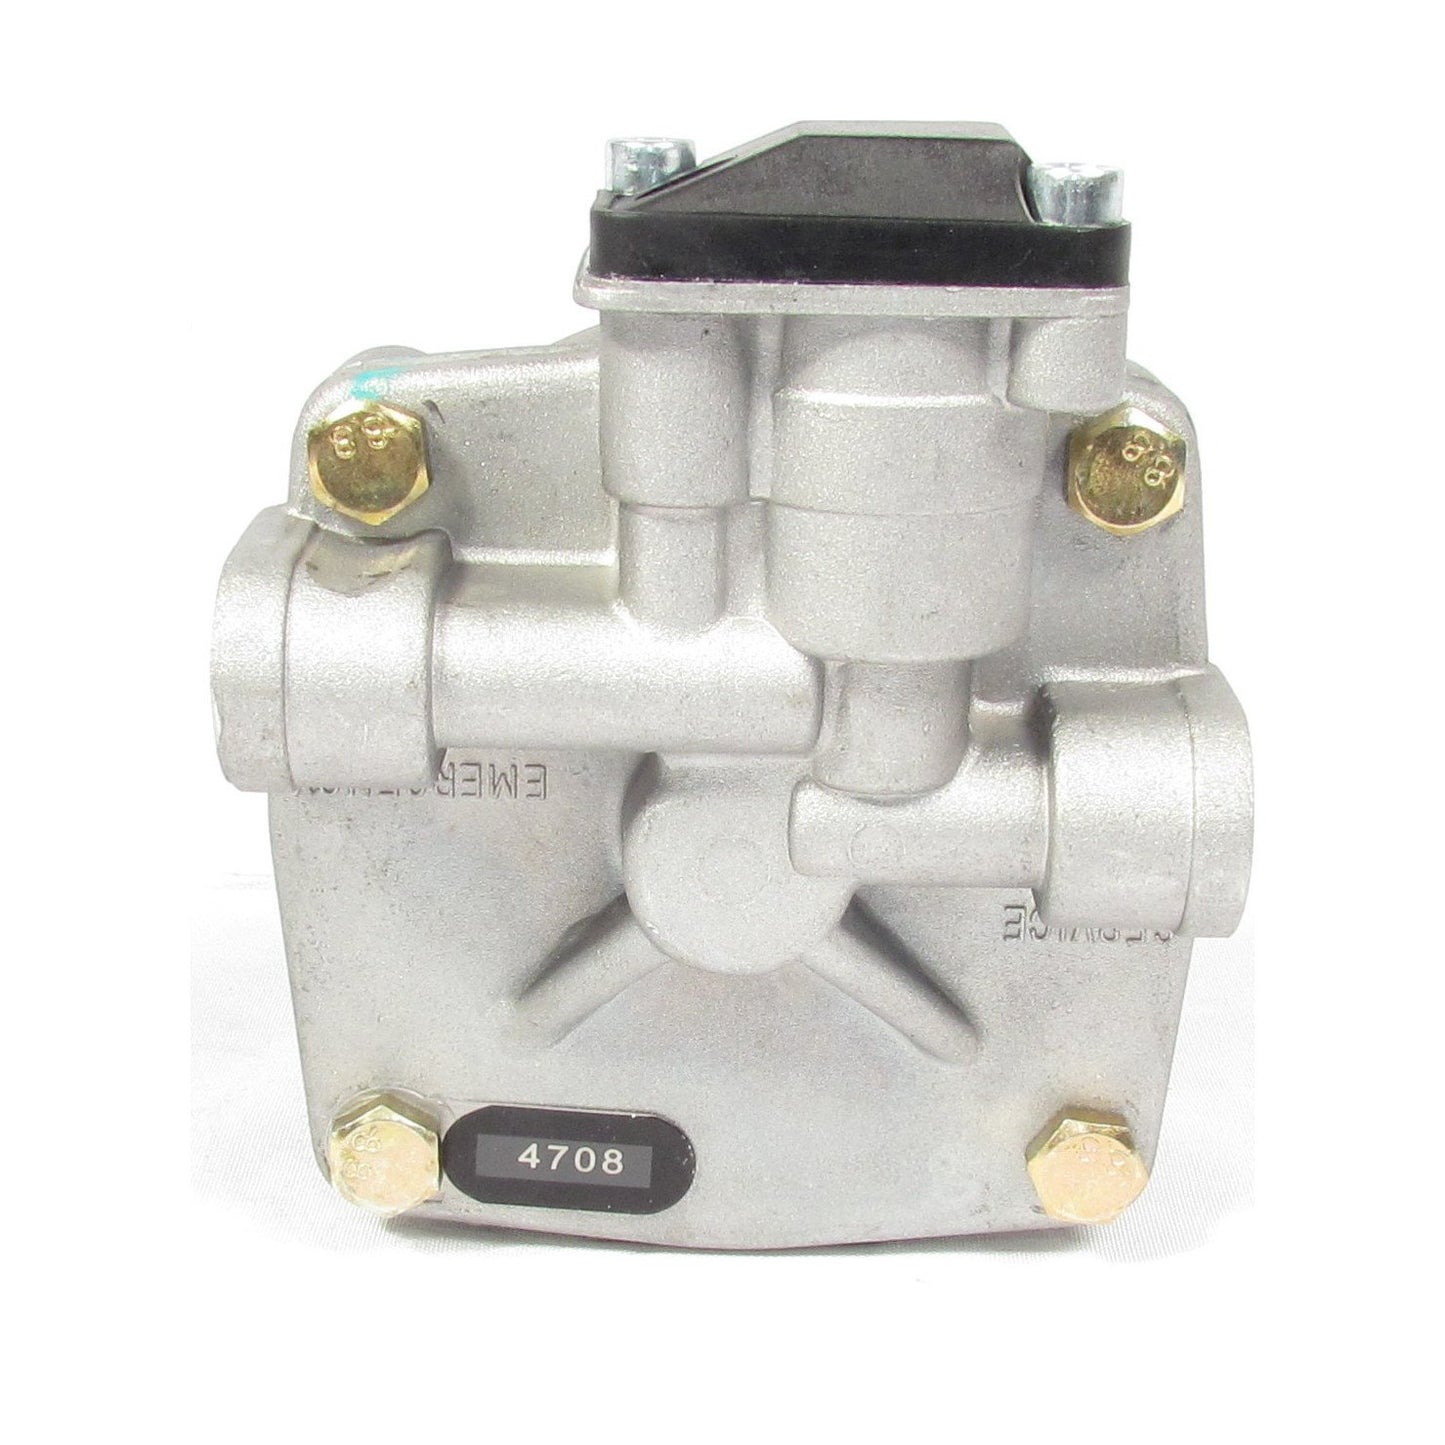 Fortpro Emergency Relay Valve Replacement for Haldex KN30300 | F224708